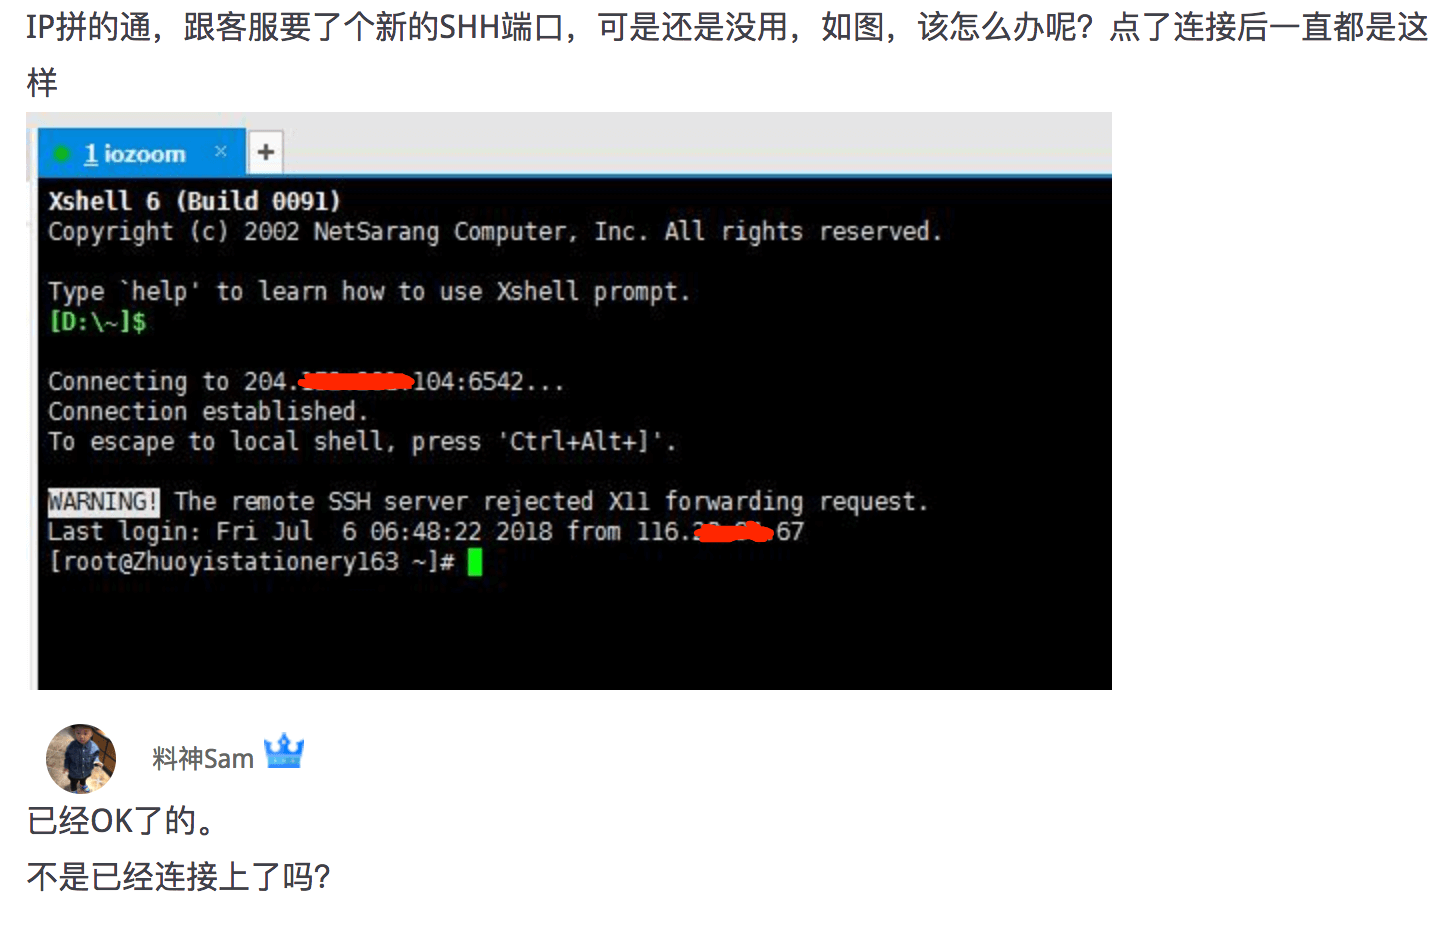 Xshell 6 连接时提示：WARNING! The remote SSH server rejected x11 forwarding request.-料网 - 外贸老鸟之路